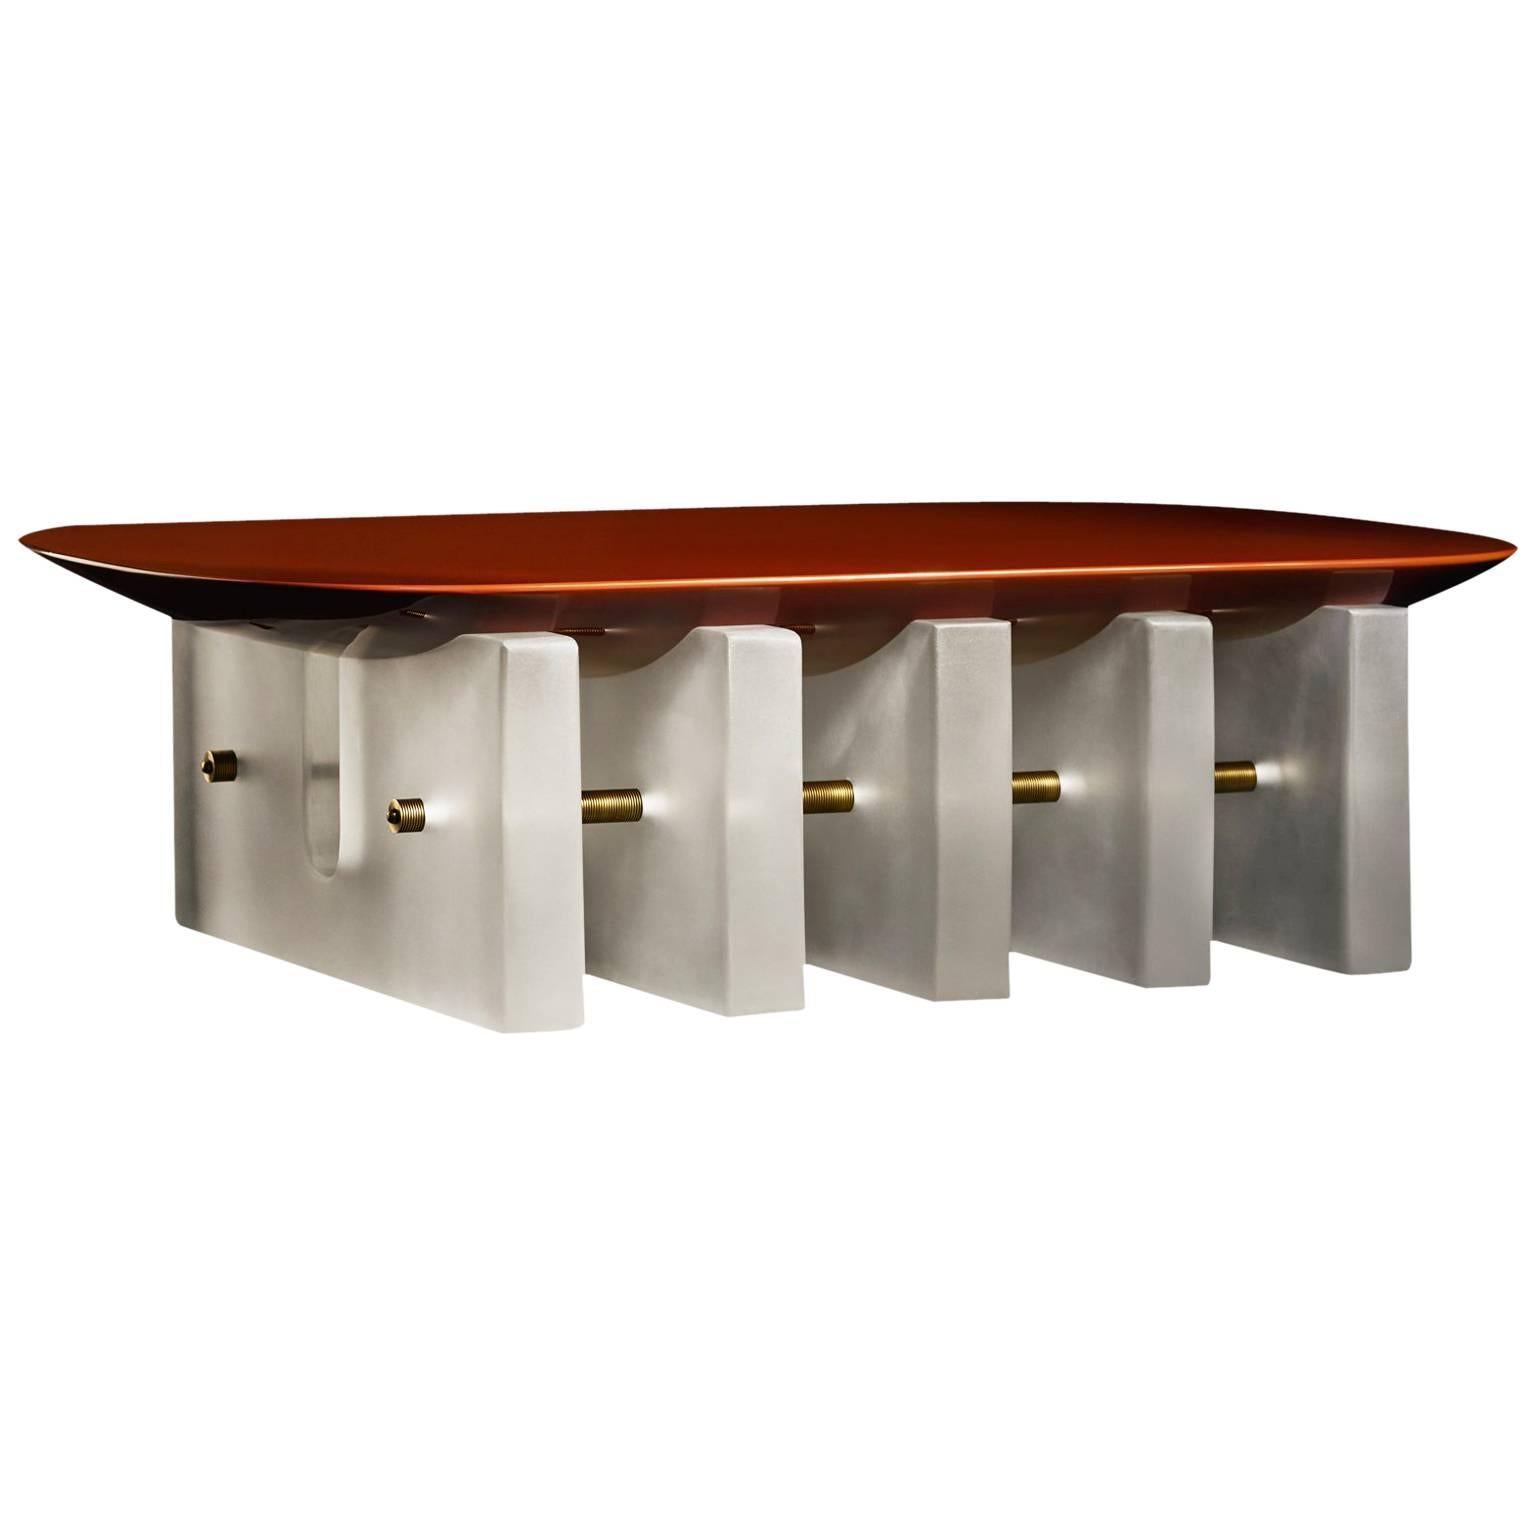 The translucent resin bases of the Segment series lift softly-rounded forms, creating a visual play between density and lightness. The underside of the lacquer table tops bulge as though being pulled back to the floor, anchoring one form to the